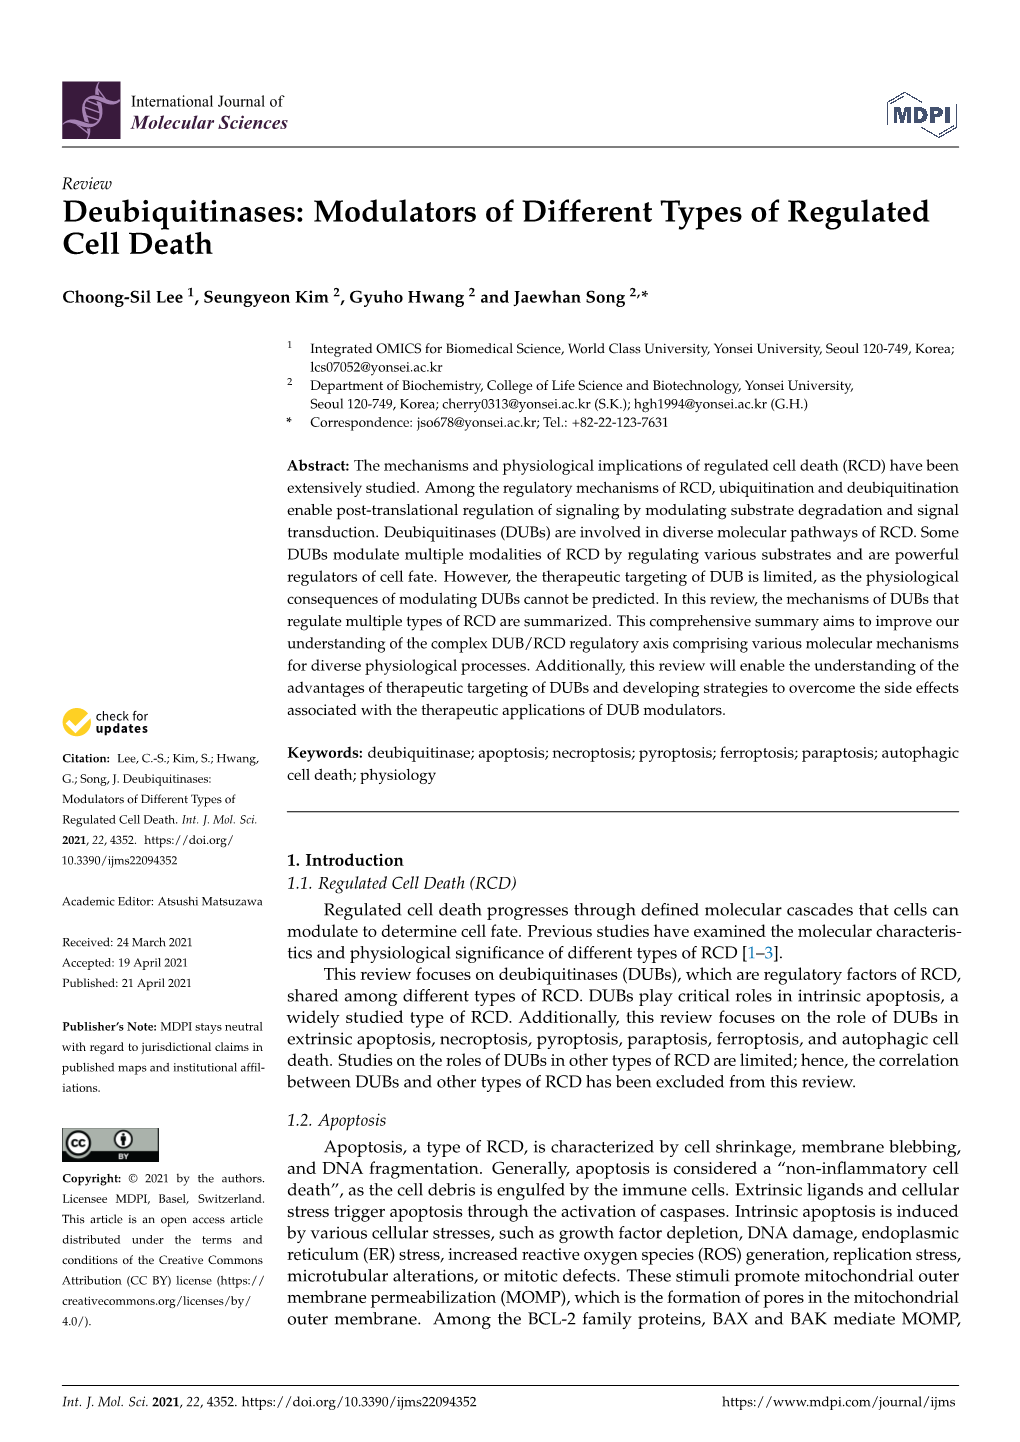 Deubiquitinases: Modulators of Different Types of Regulated Cell Death